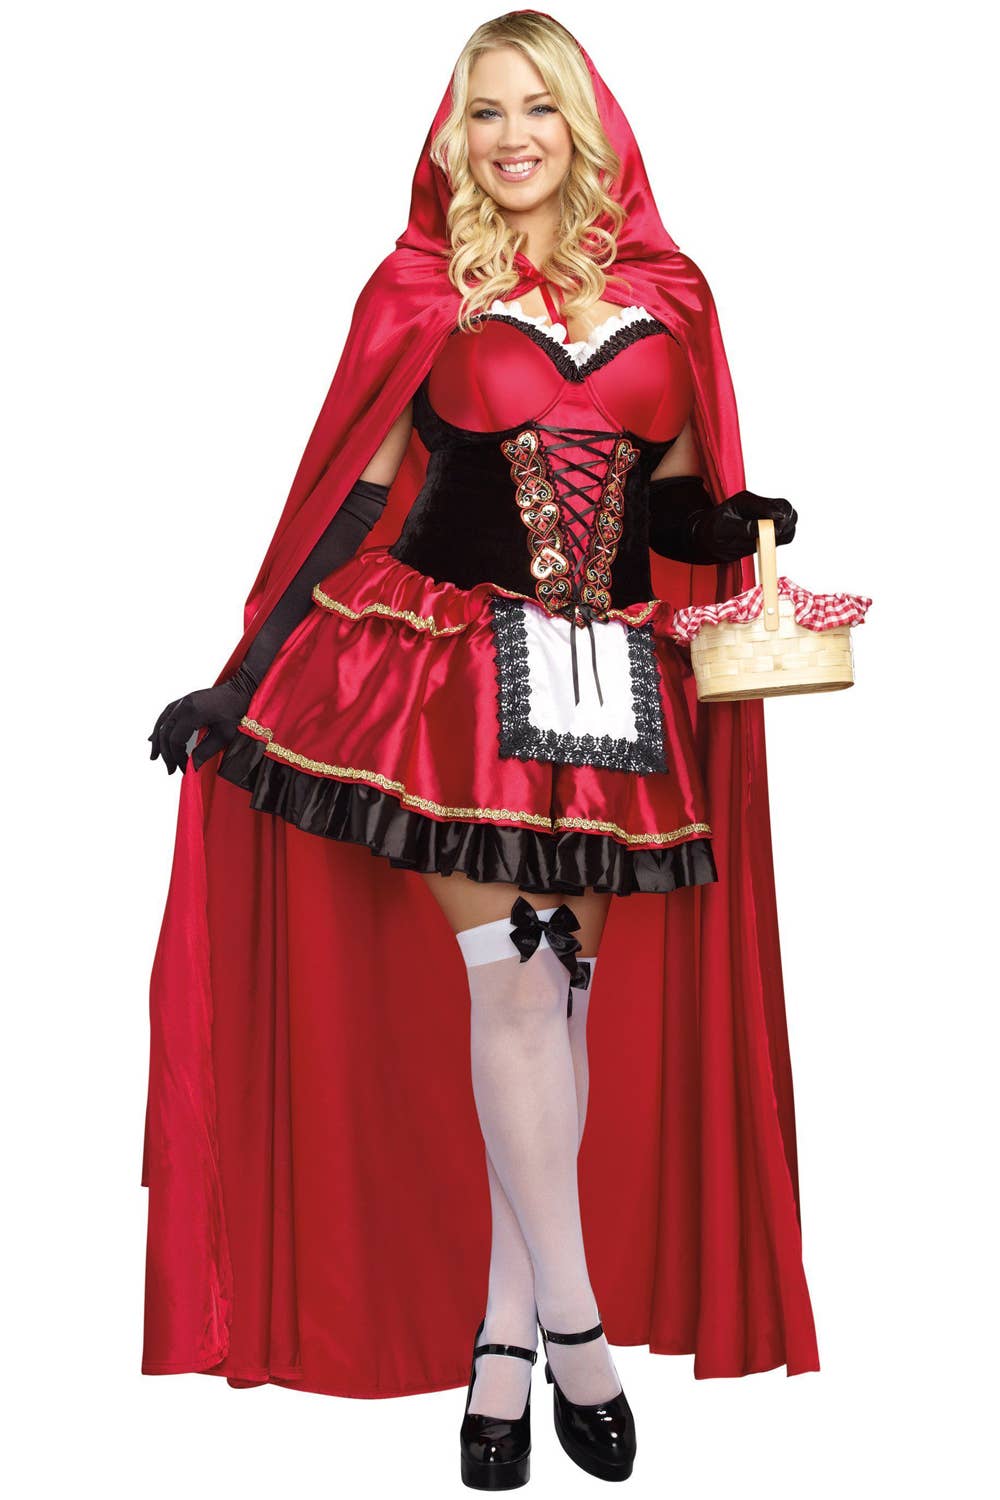 Women's Plus Size Sexy Red Riding Hood Costume - Front Image